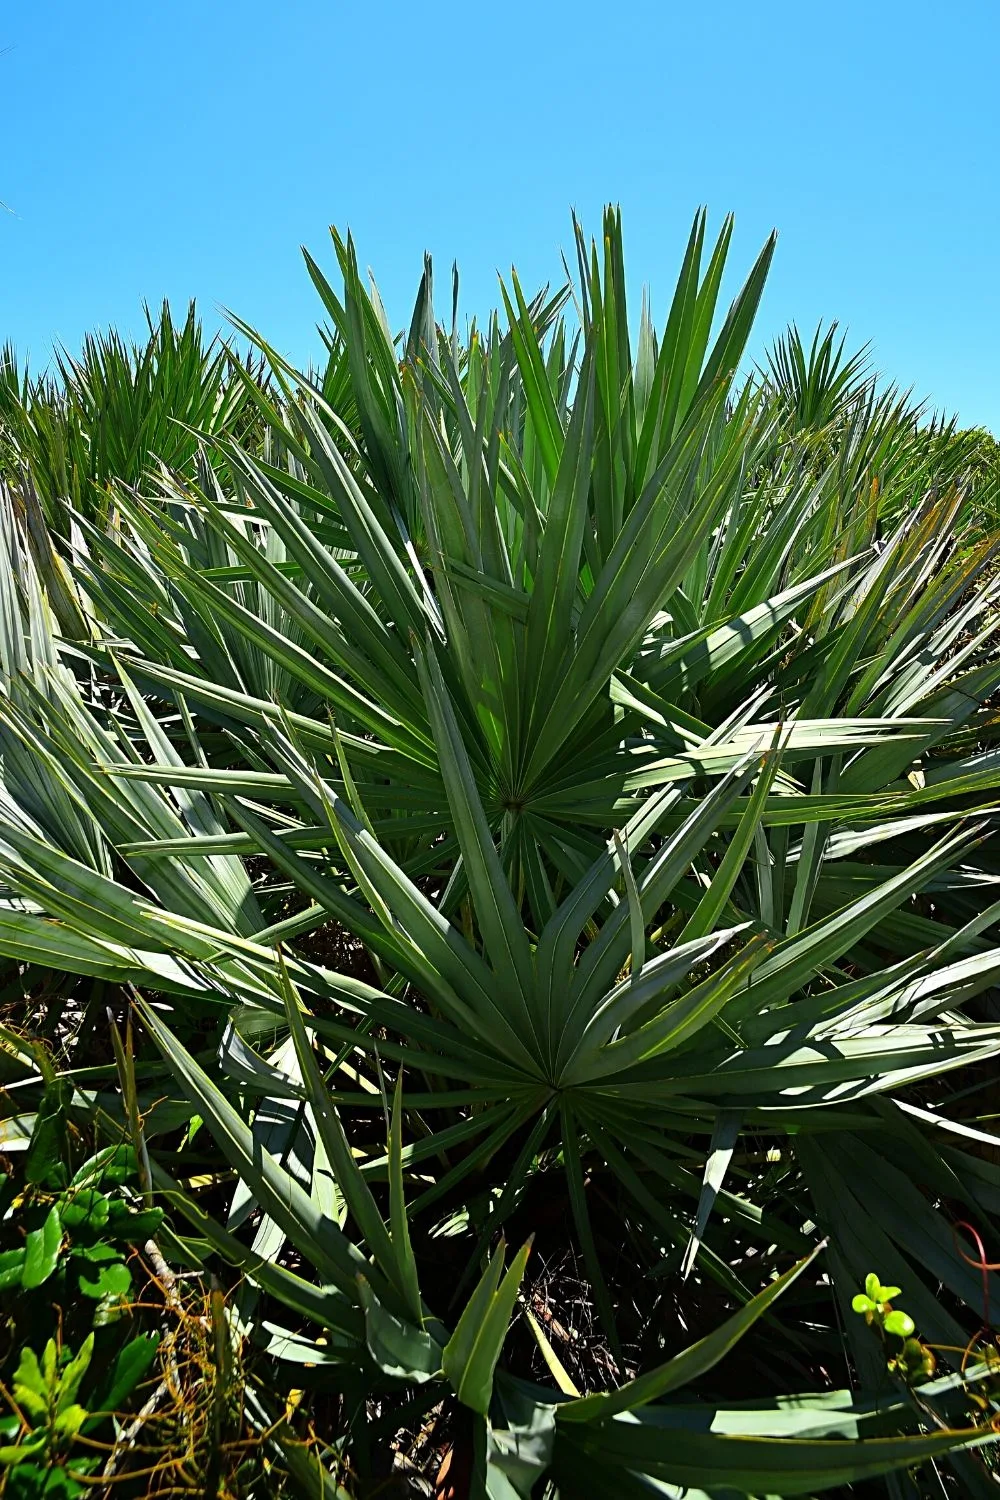 Silver saw palmetto, known for its sword-like leaves, is another stunning plant you can grow on a west-facing balcony